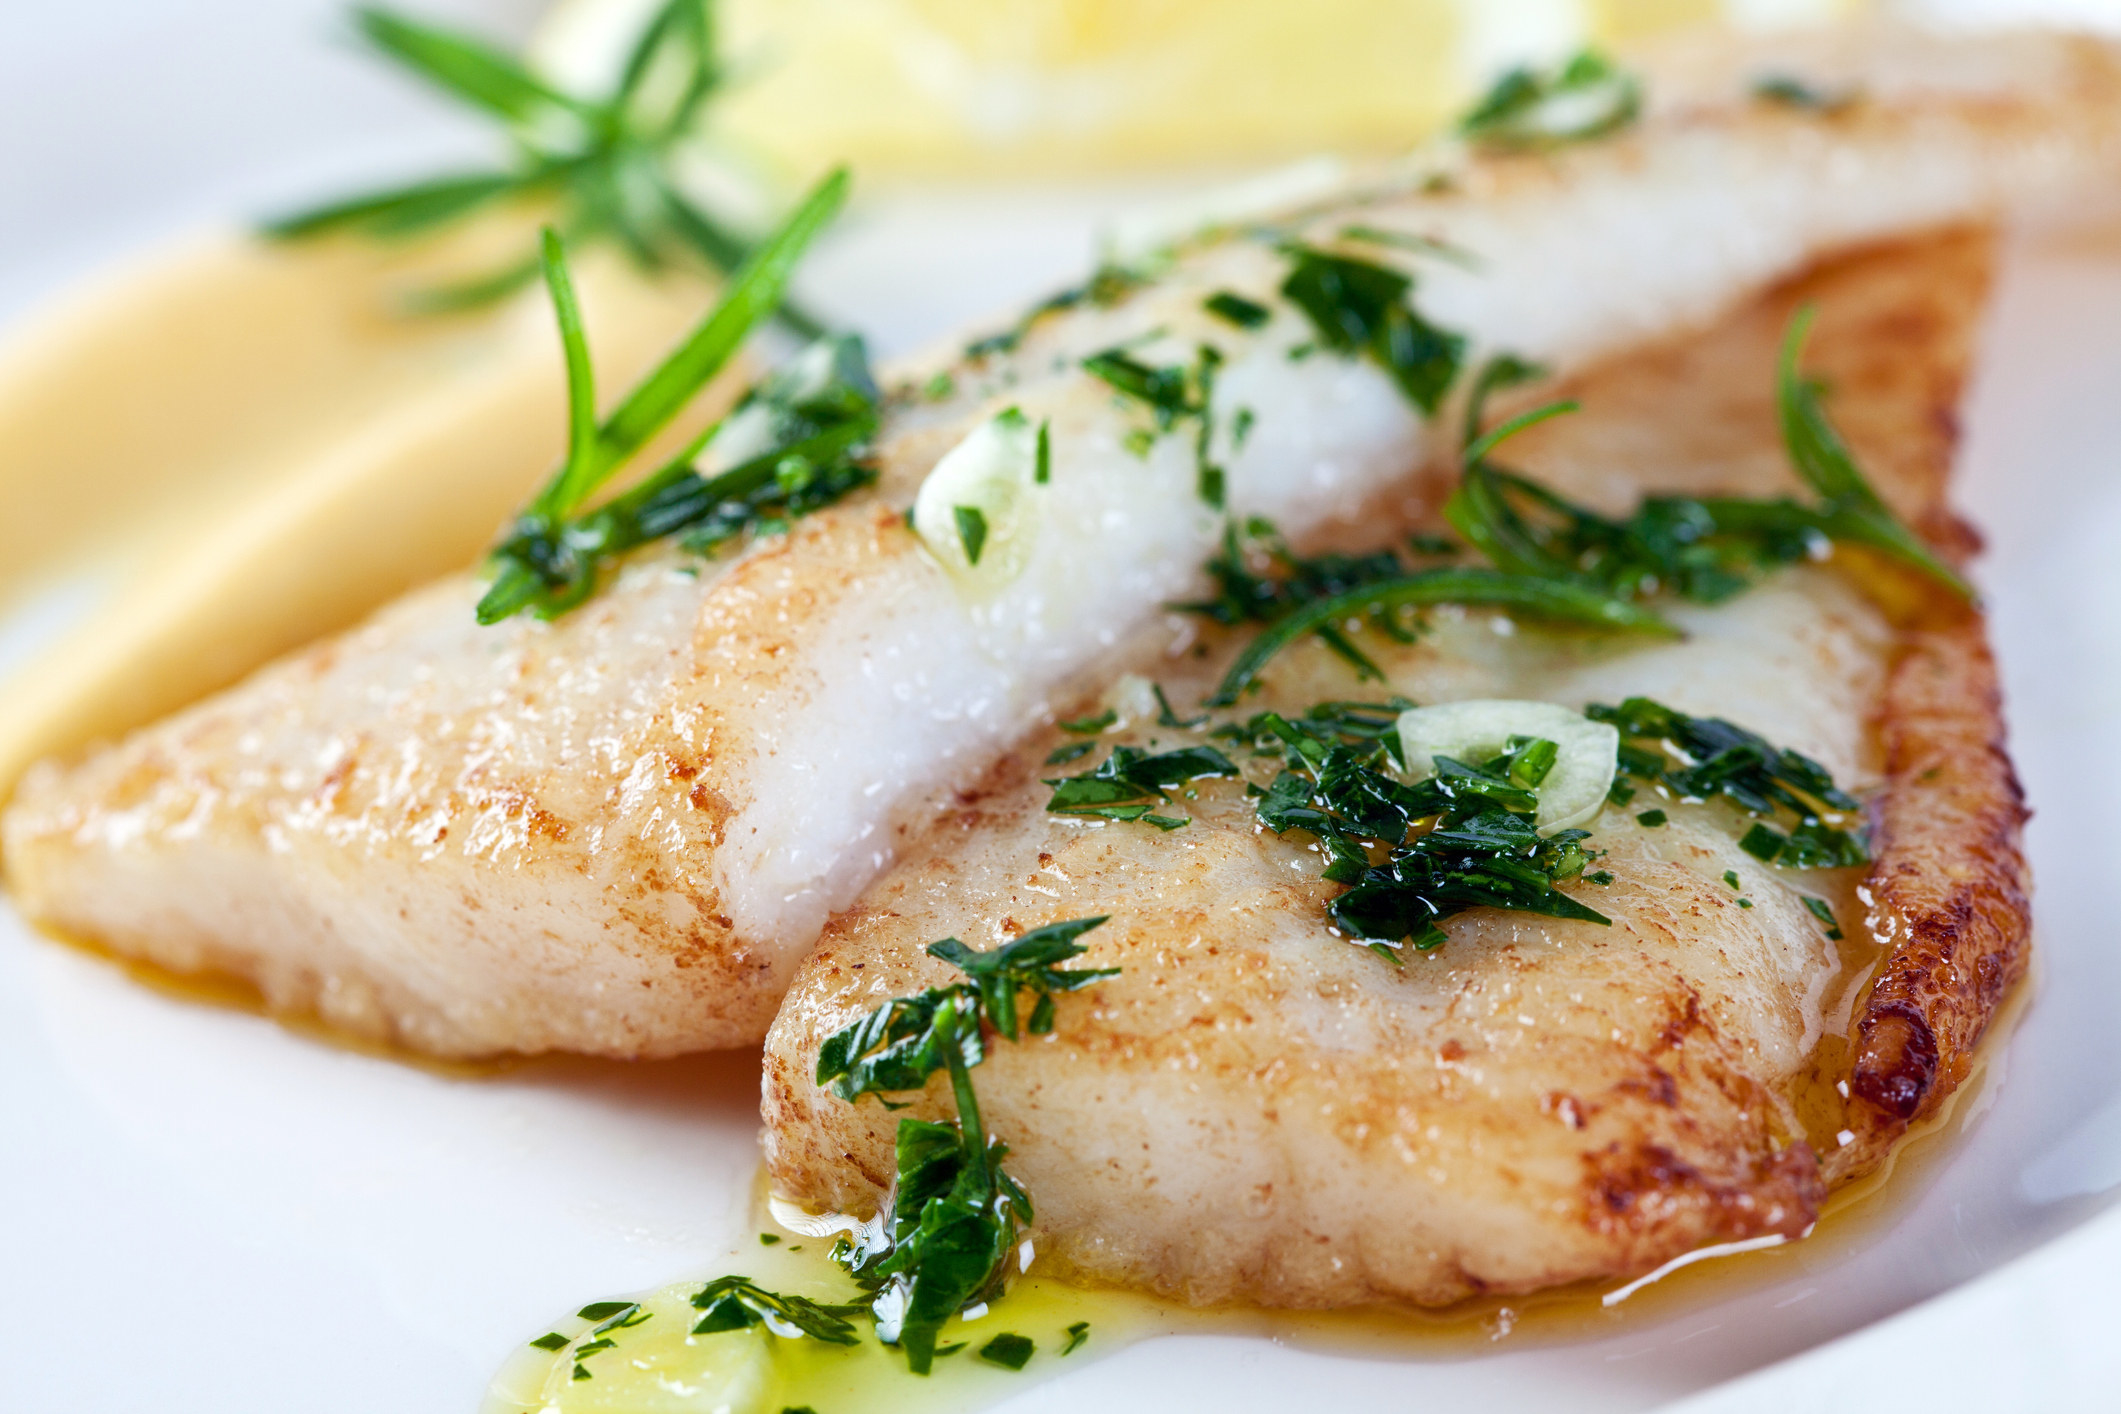 Fillet of white fish with parsley, garlic, olive oil, and lemon sauce